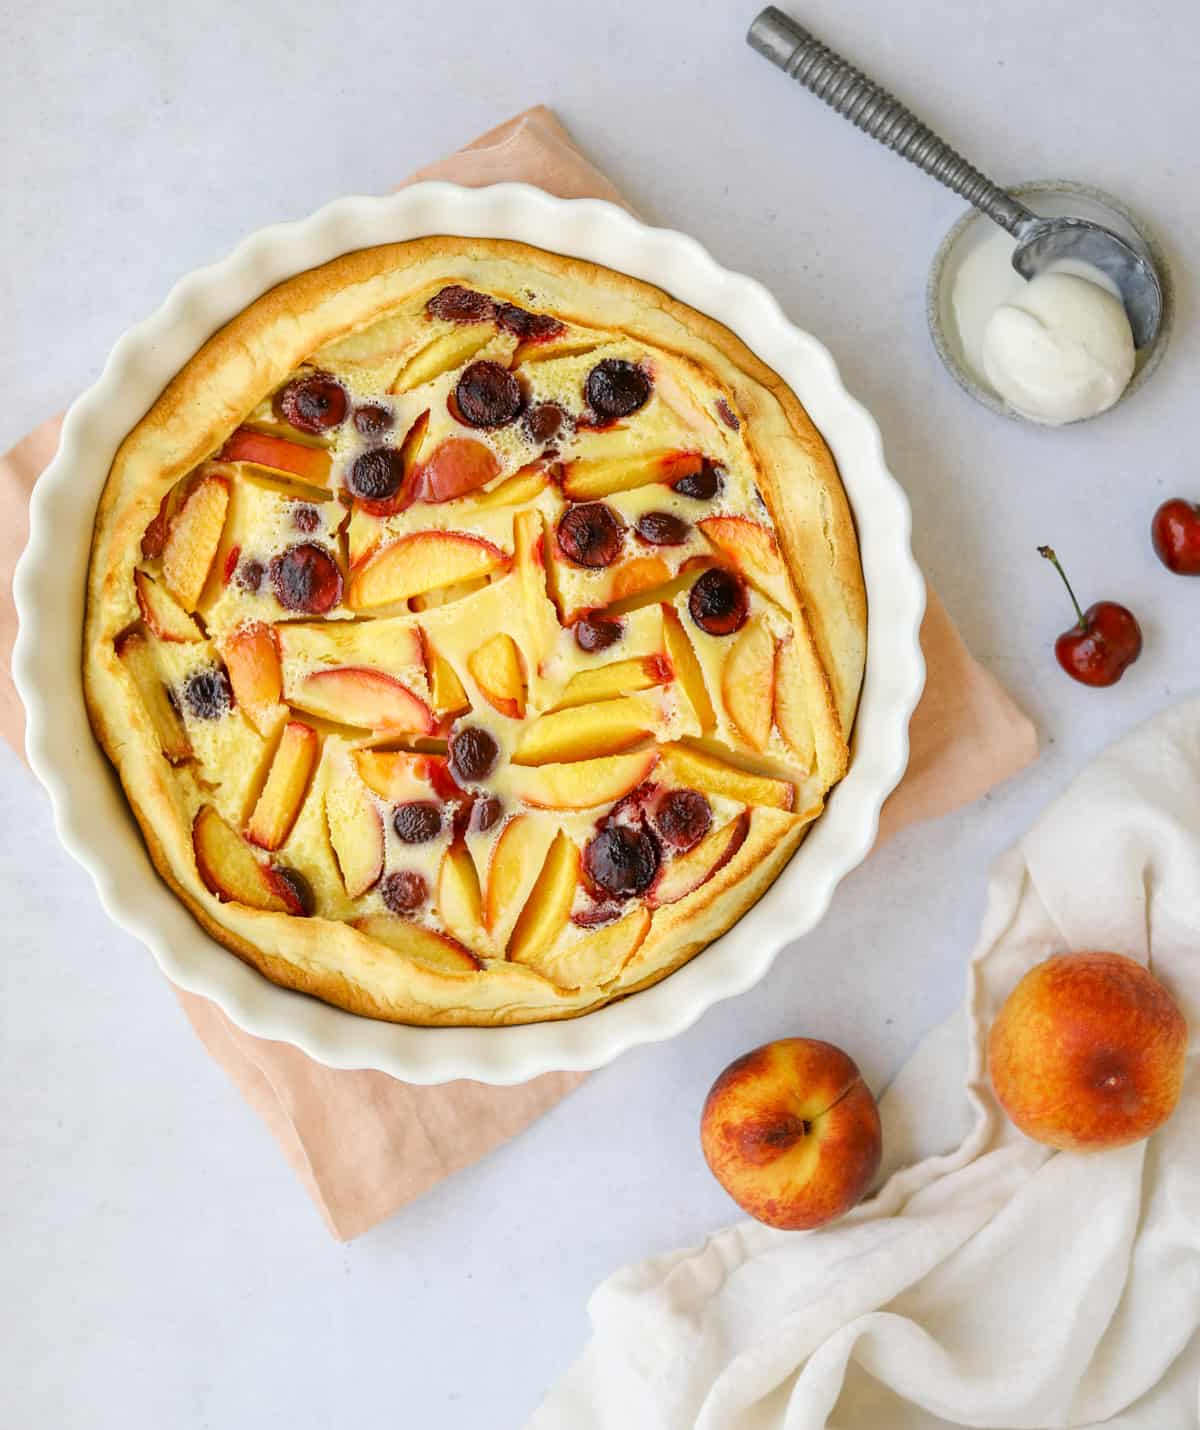 stone fruit clafoutis in a round white fluted baking dish on top of a pink linen napkin. a scoop of ice cream on the side.